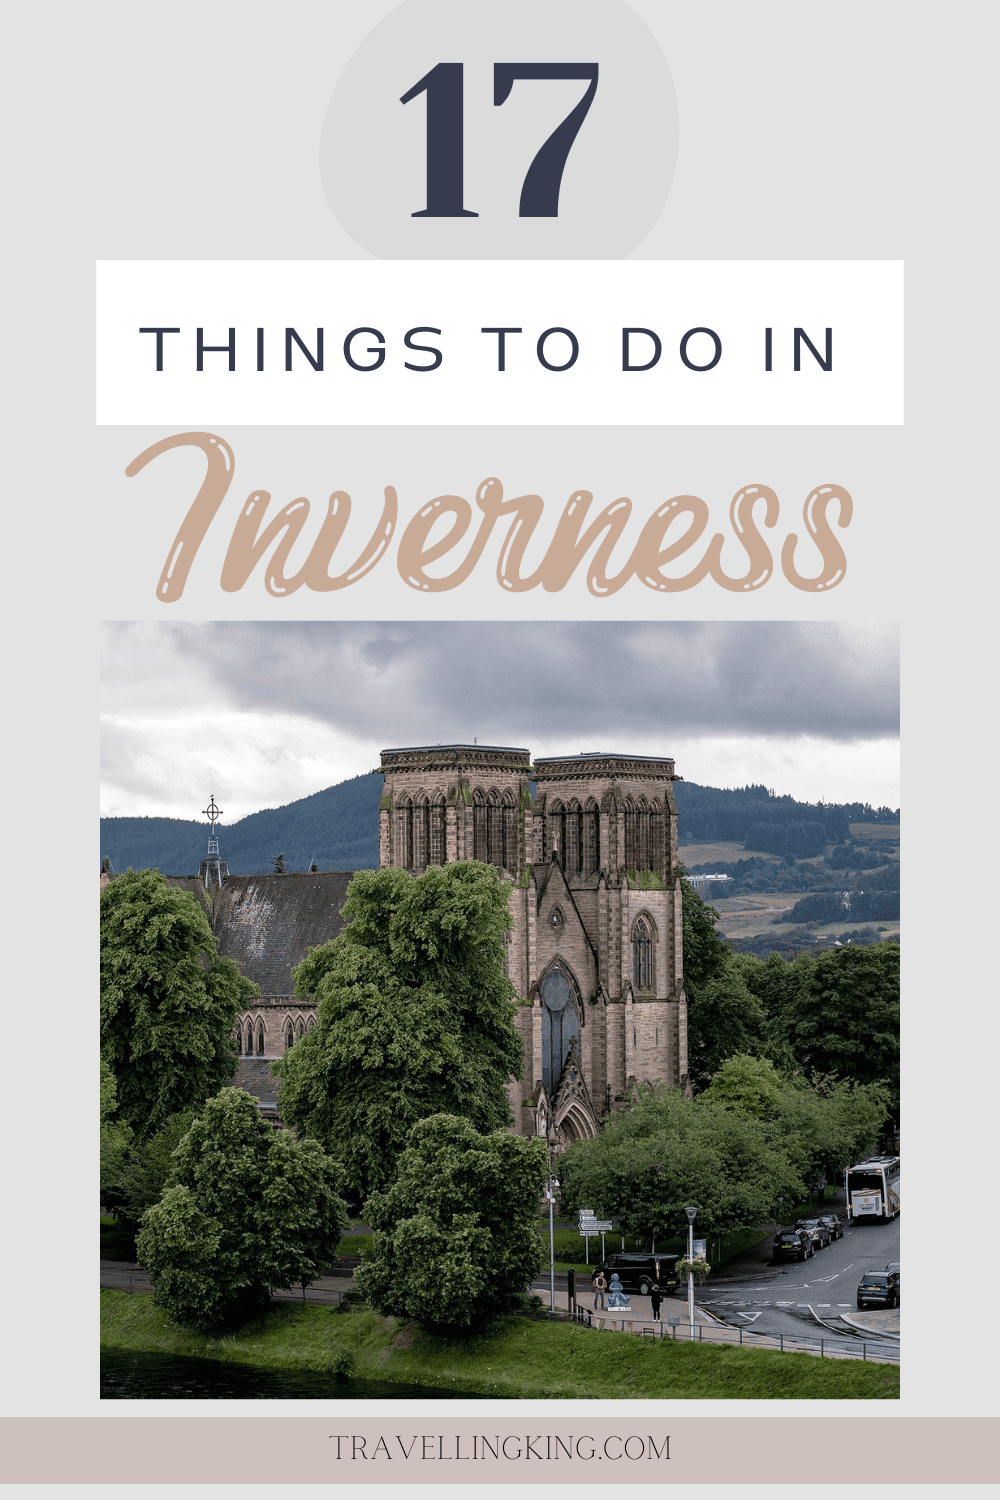 17 Things to do in Inverness